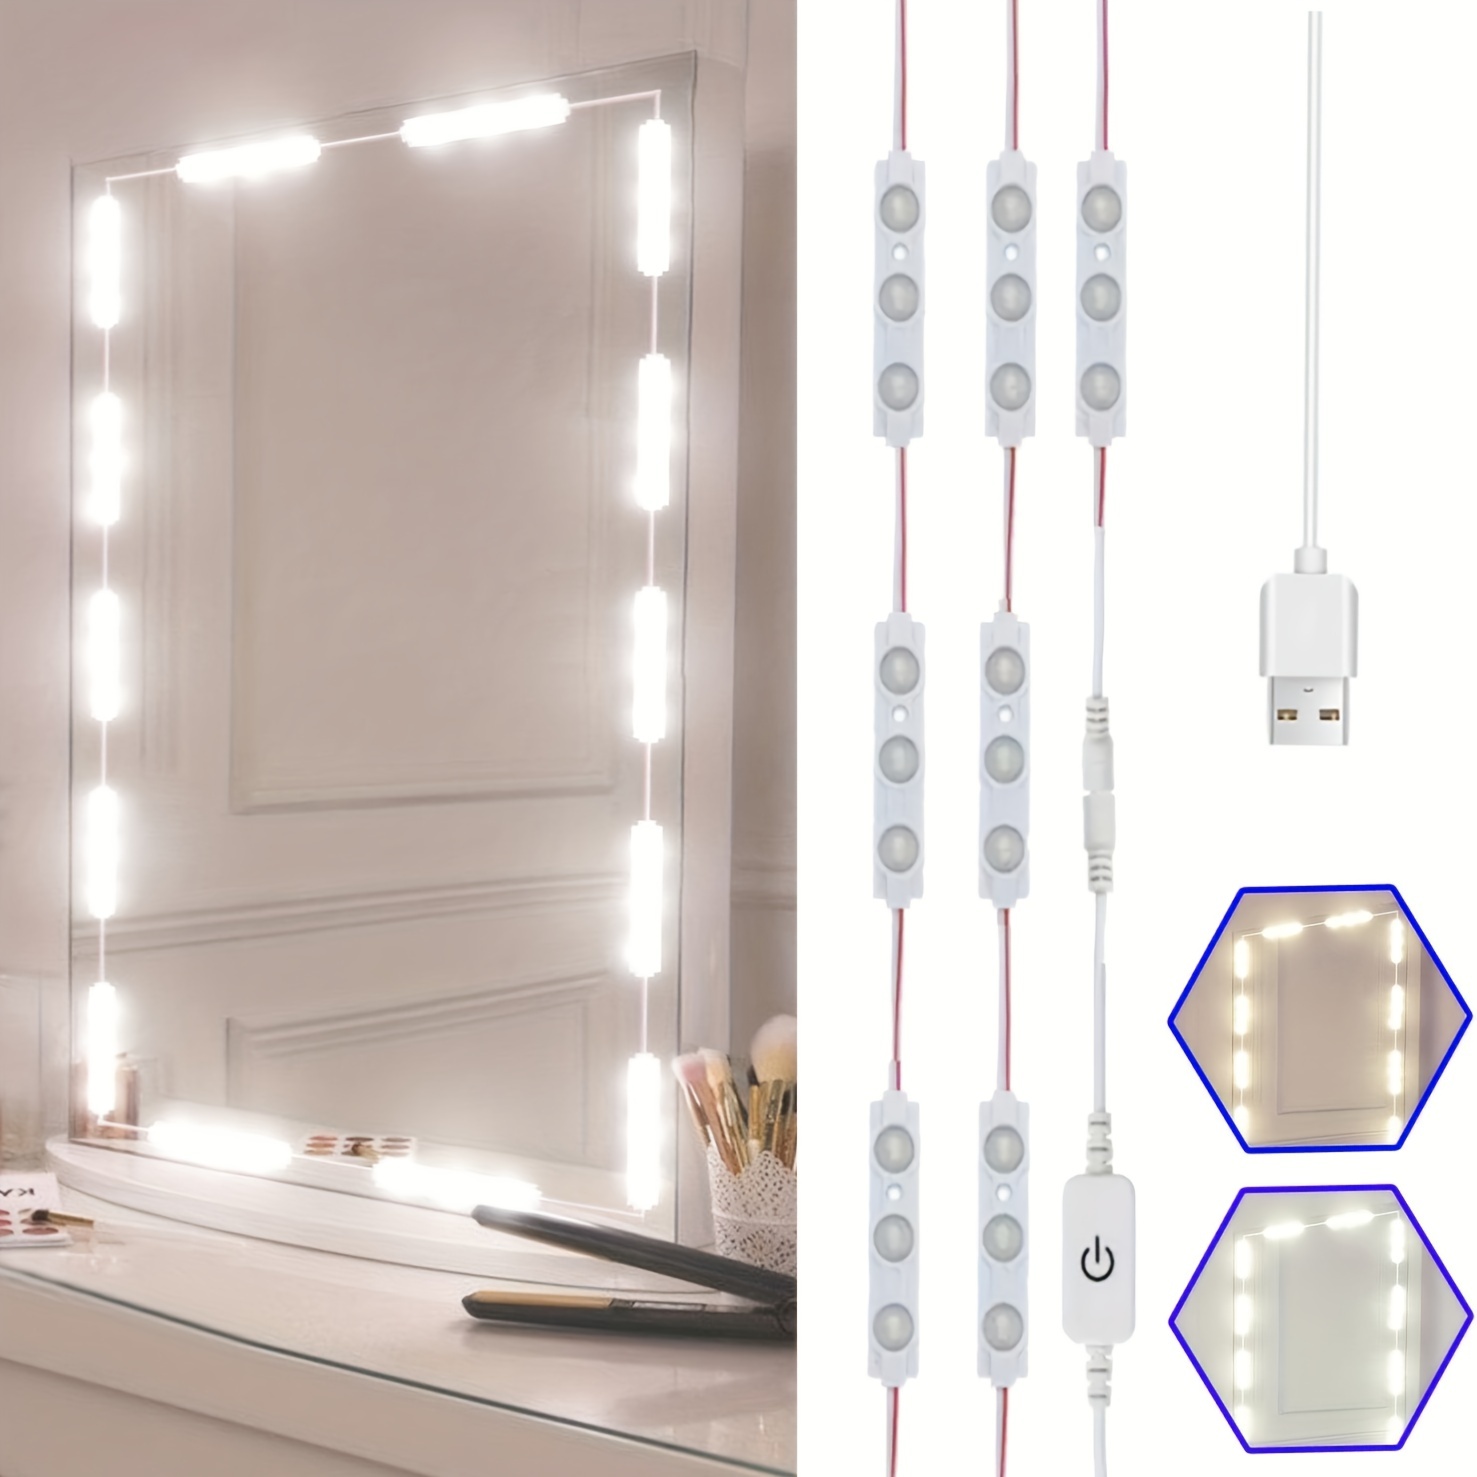 

1 Set Usb-powered 5v Dimmable Led Module Lights, 42led Touch Sensing Switch Cold White Strip Lights, Light Up Your Room, Bright Makeup Table And Bathroom Mirror Make Makeup More Relaxed And Beautiful